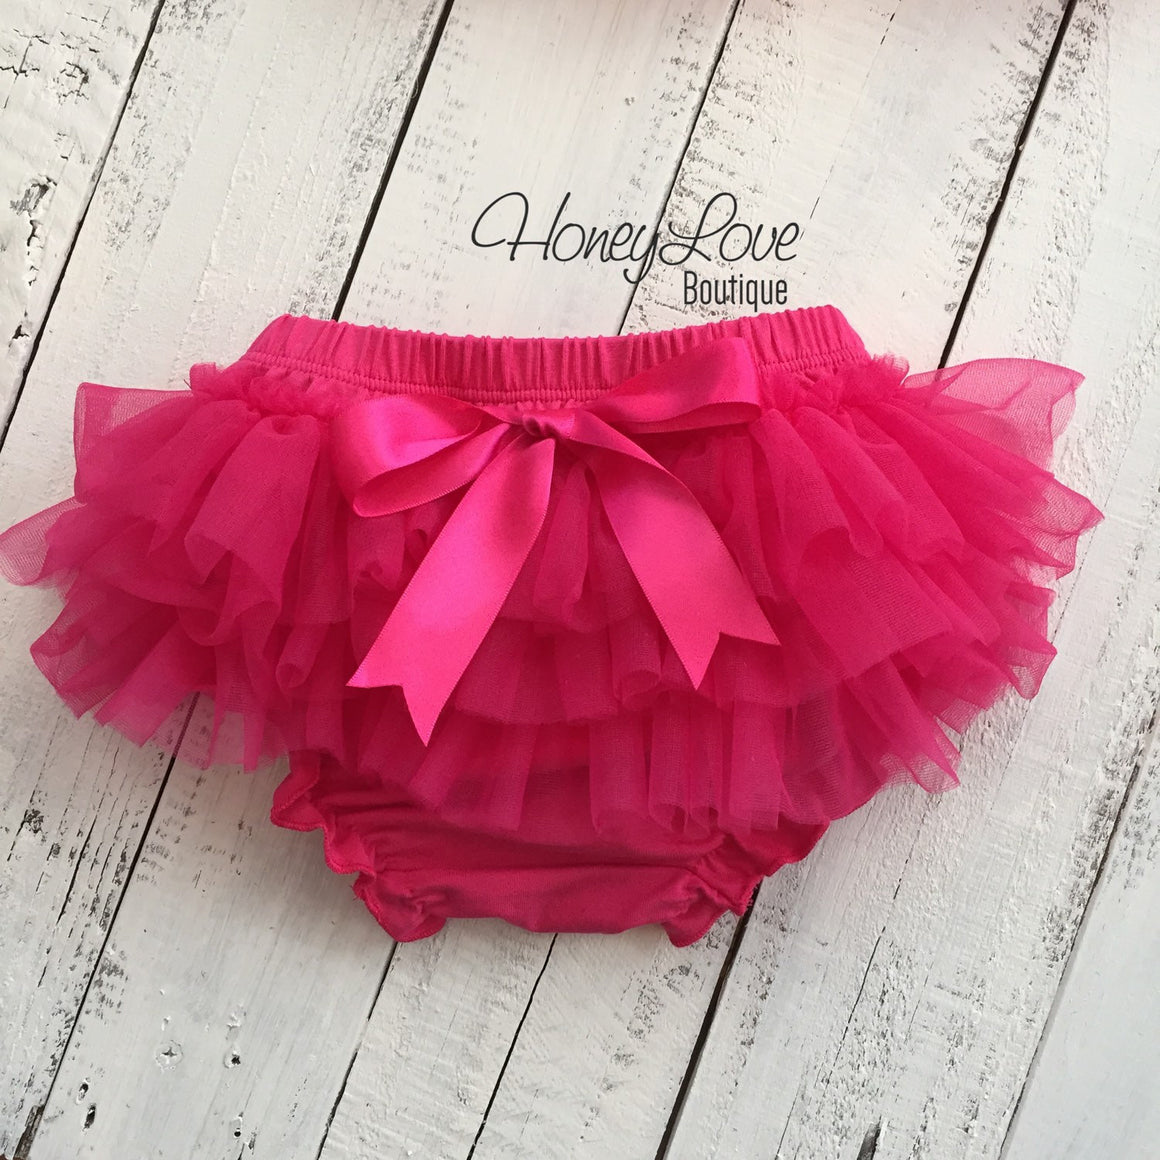 PERSONALIZED Name inside Heart - Watermelon Pink and Silver/Gold Glitter - tutu skirt bloomer - HoneyLoveBoutique